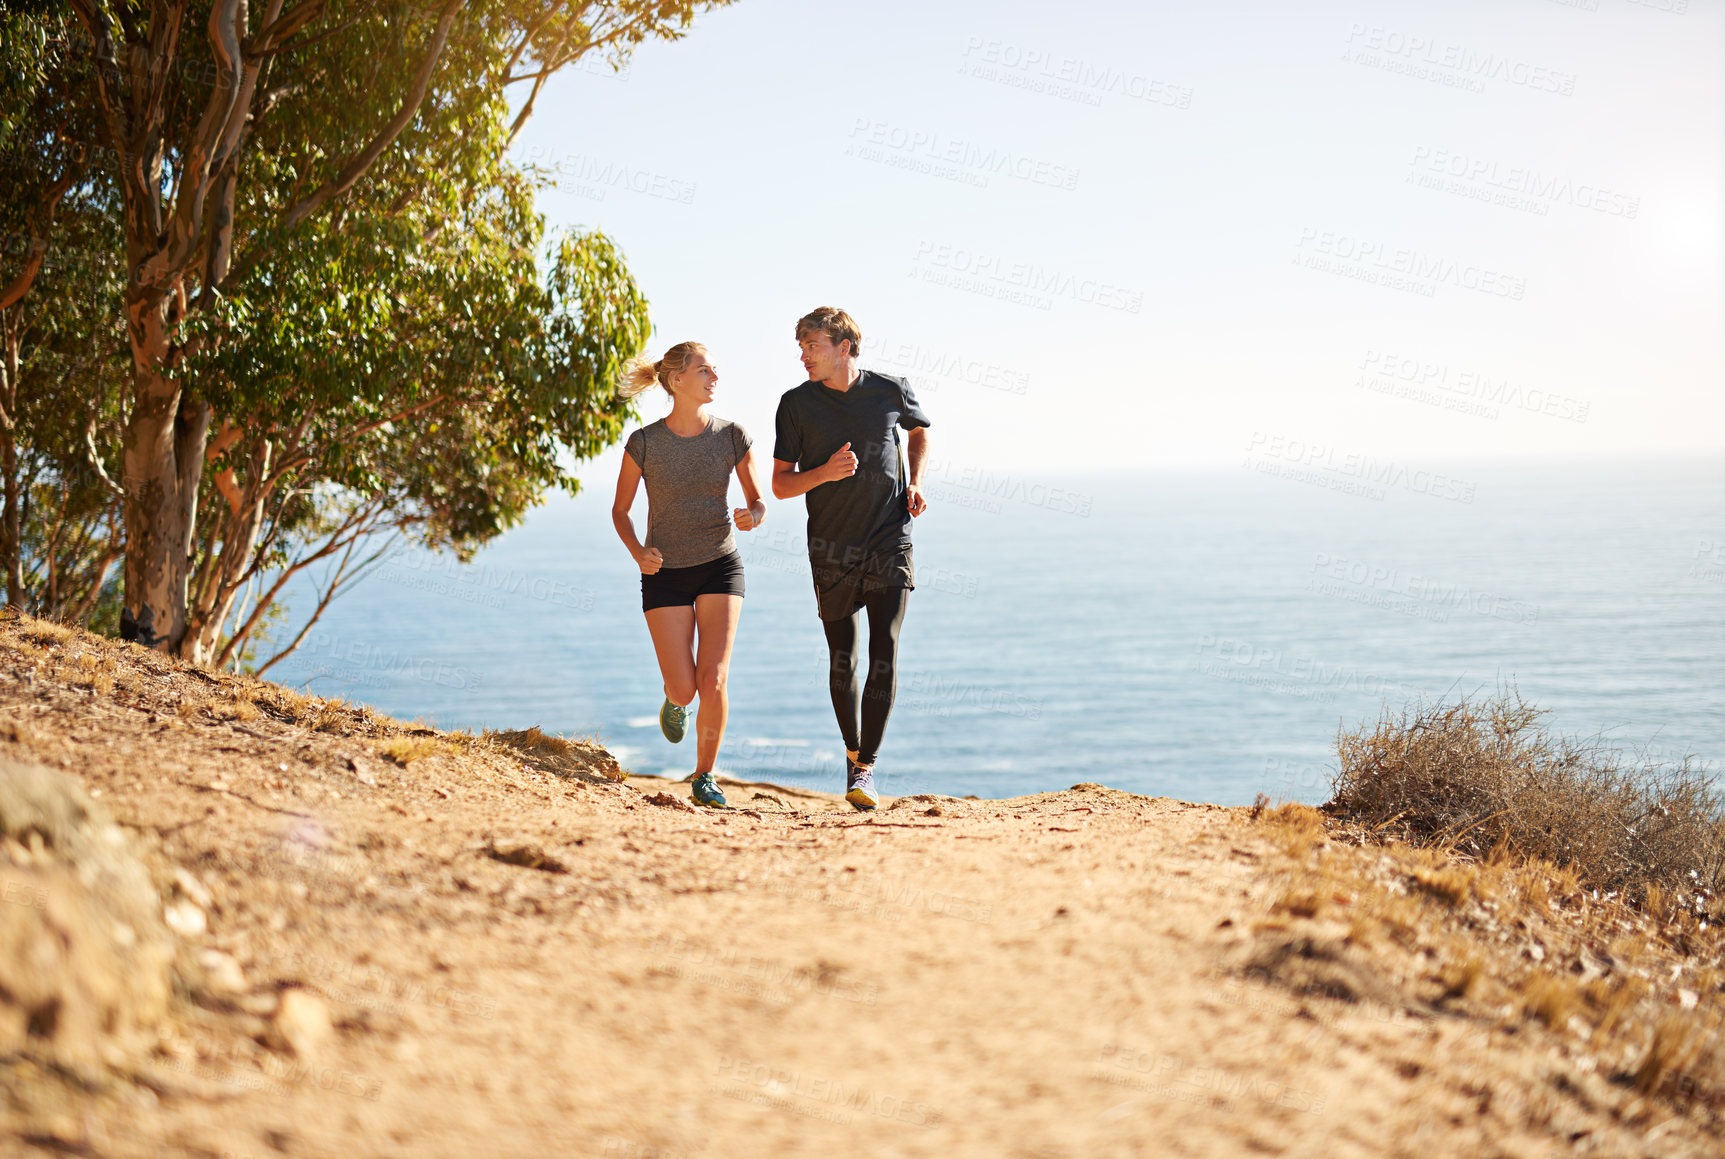 Buy stock photo Shot of a young couple trail running